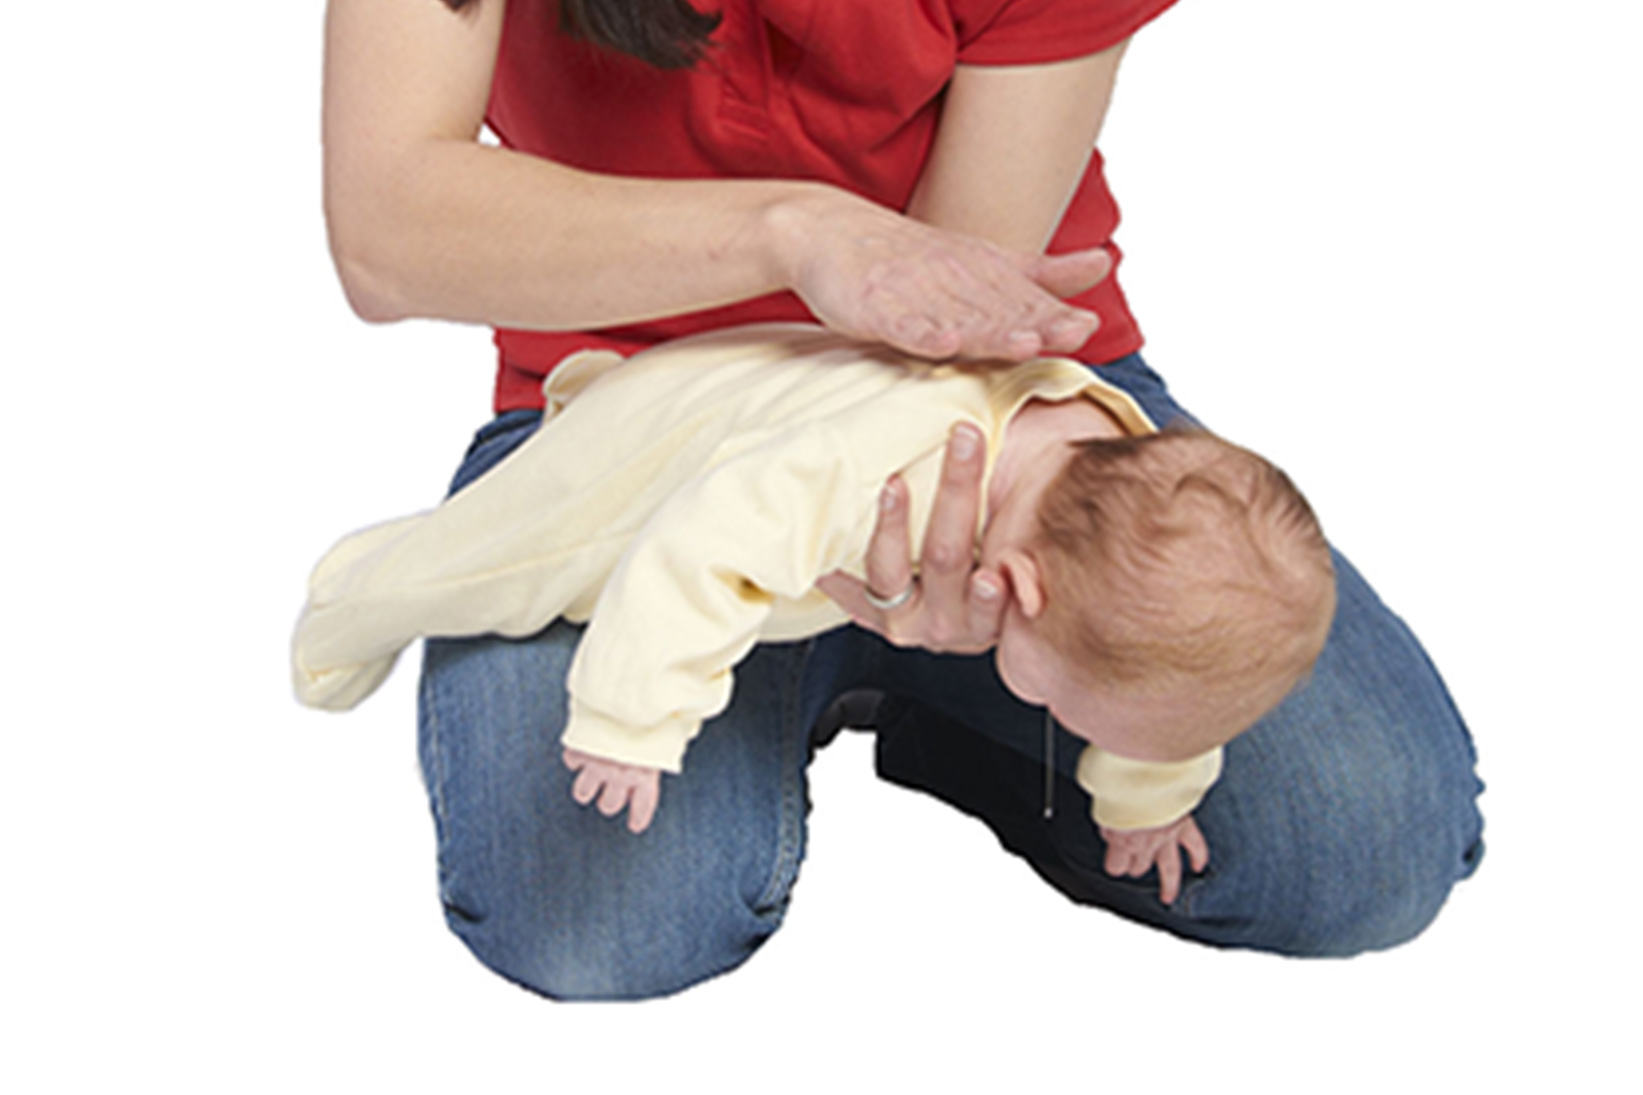 paediatric-first-aid-training-courses